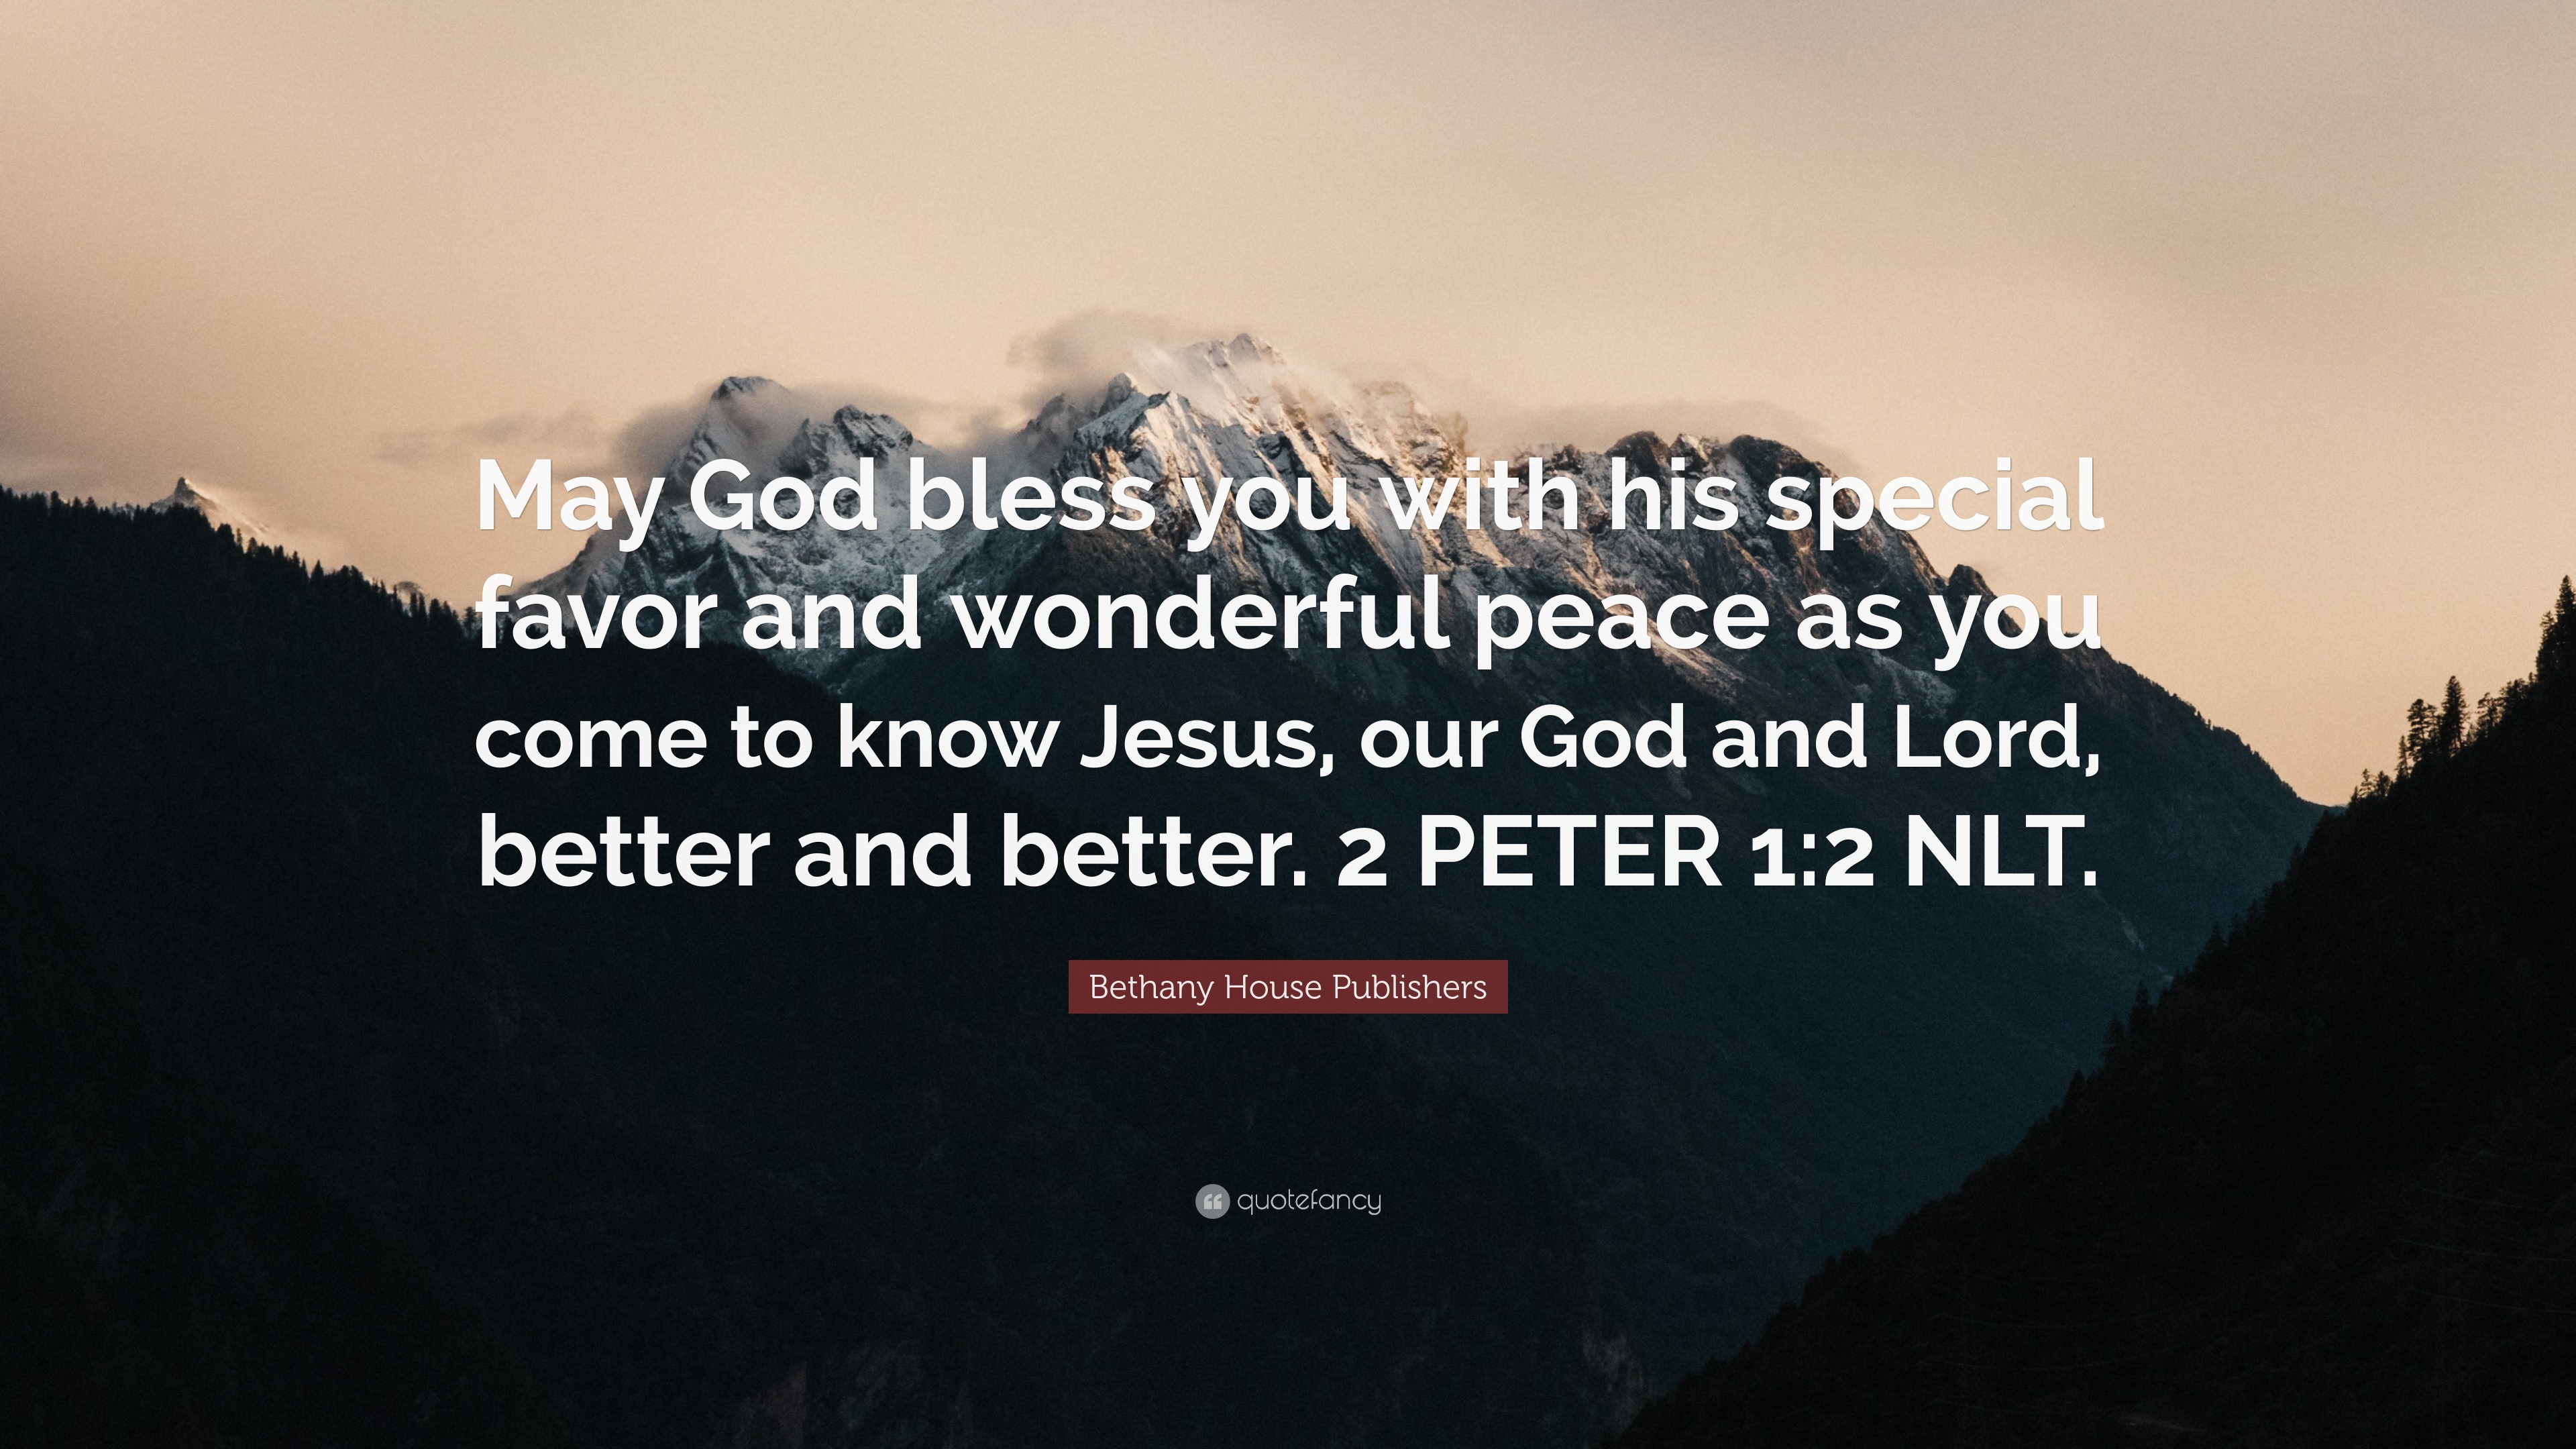 Bethany House Publishers Quote: “May God bless you with his special favor  and wonderful peace as you come to know Jesus, our God and Lord, better and  bet”